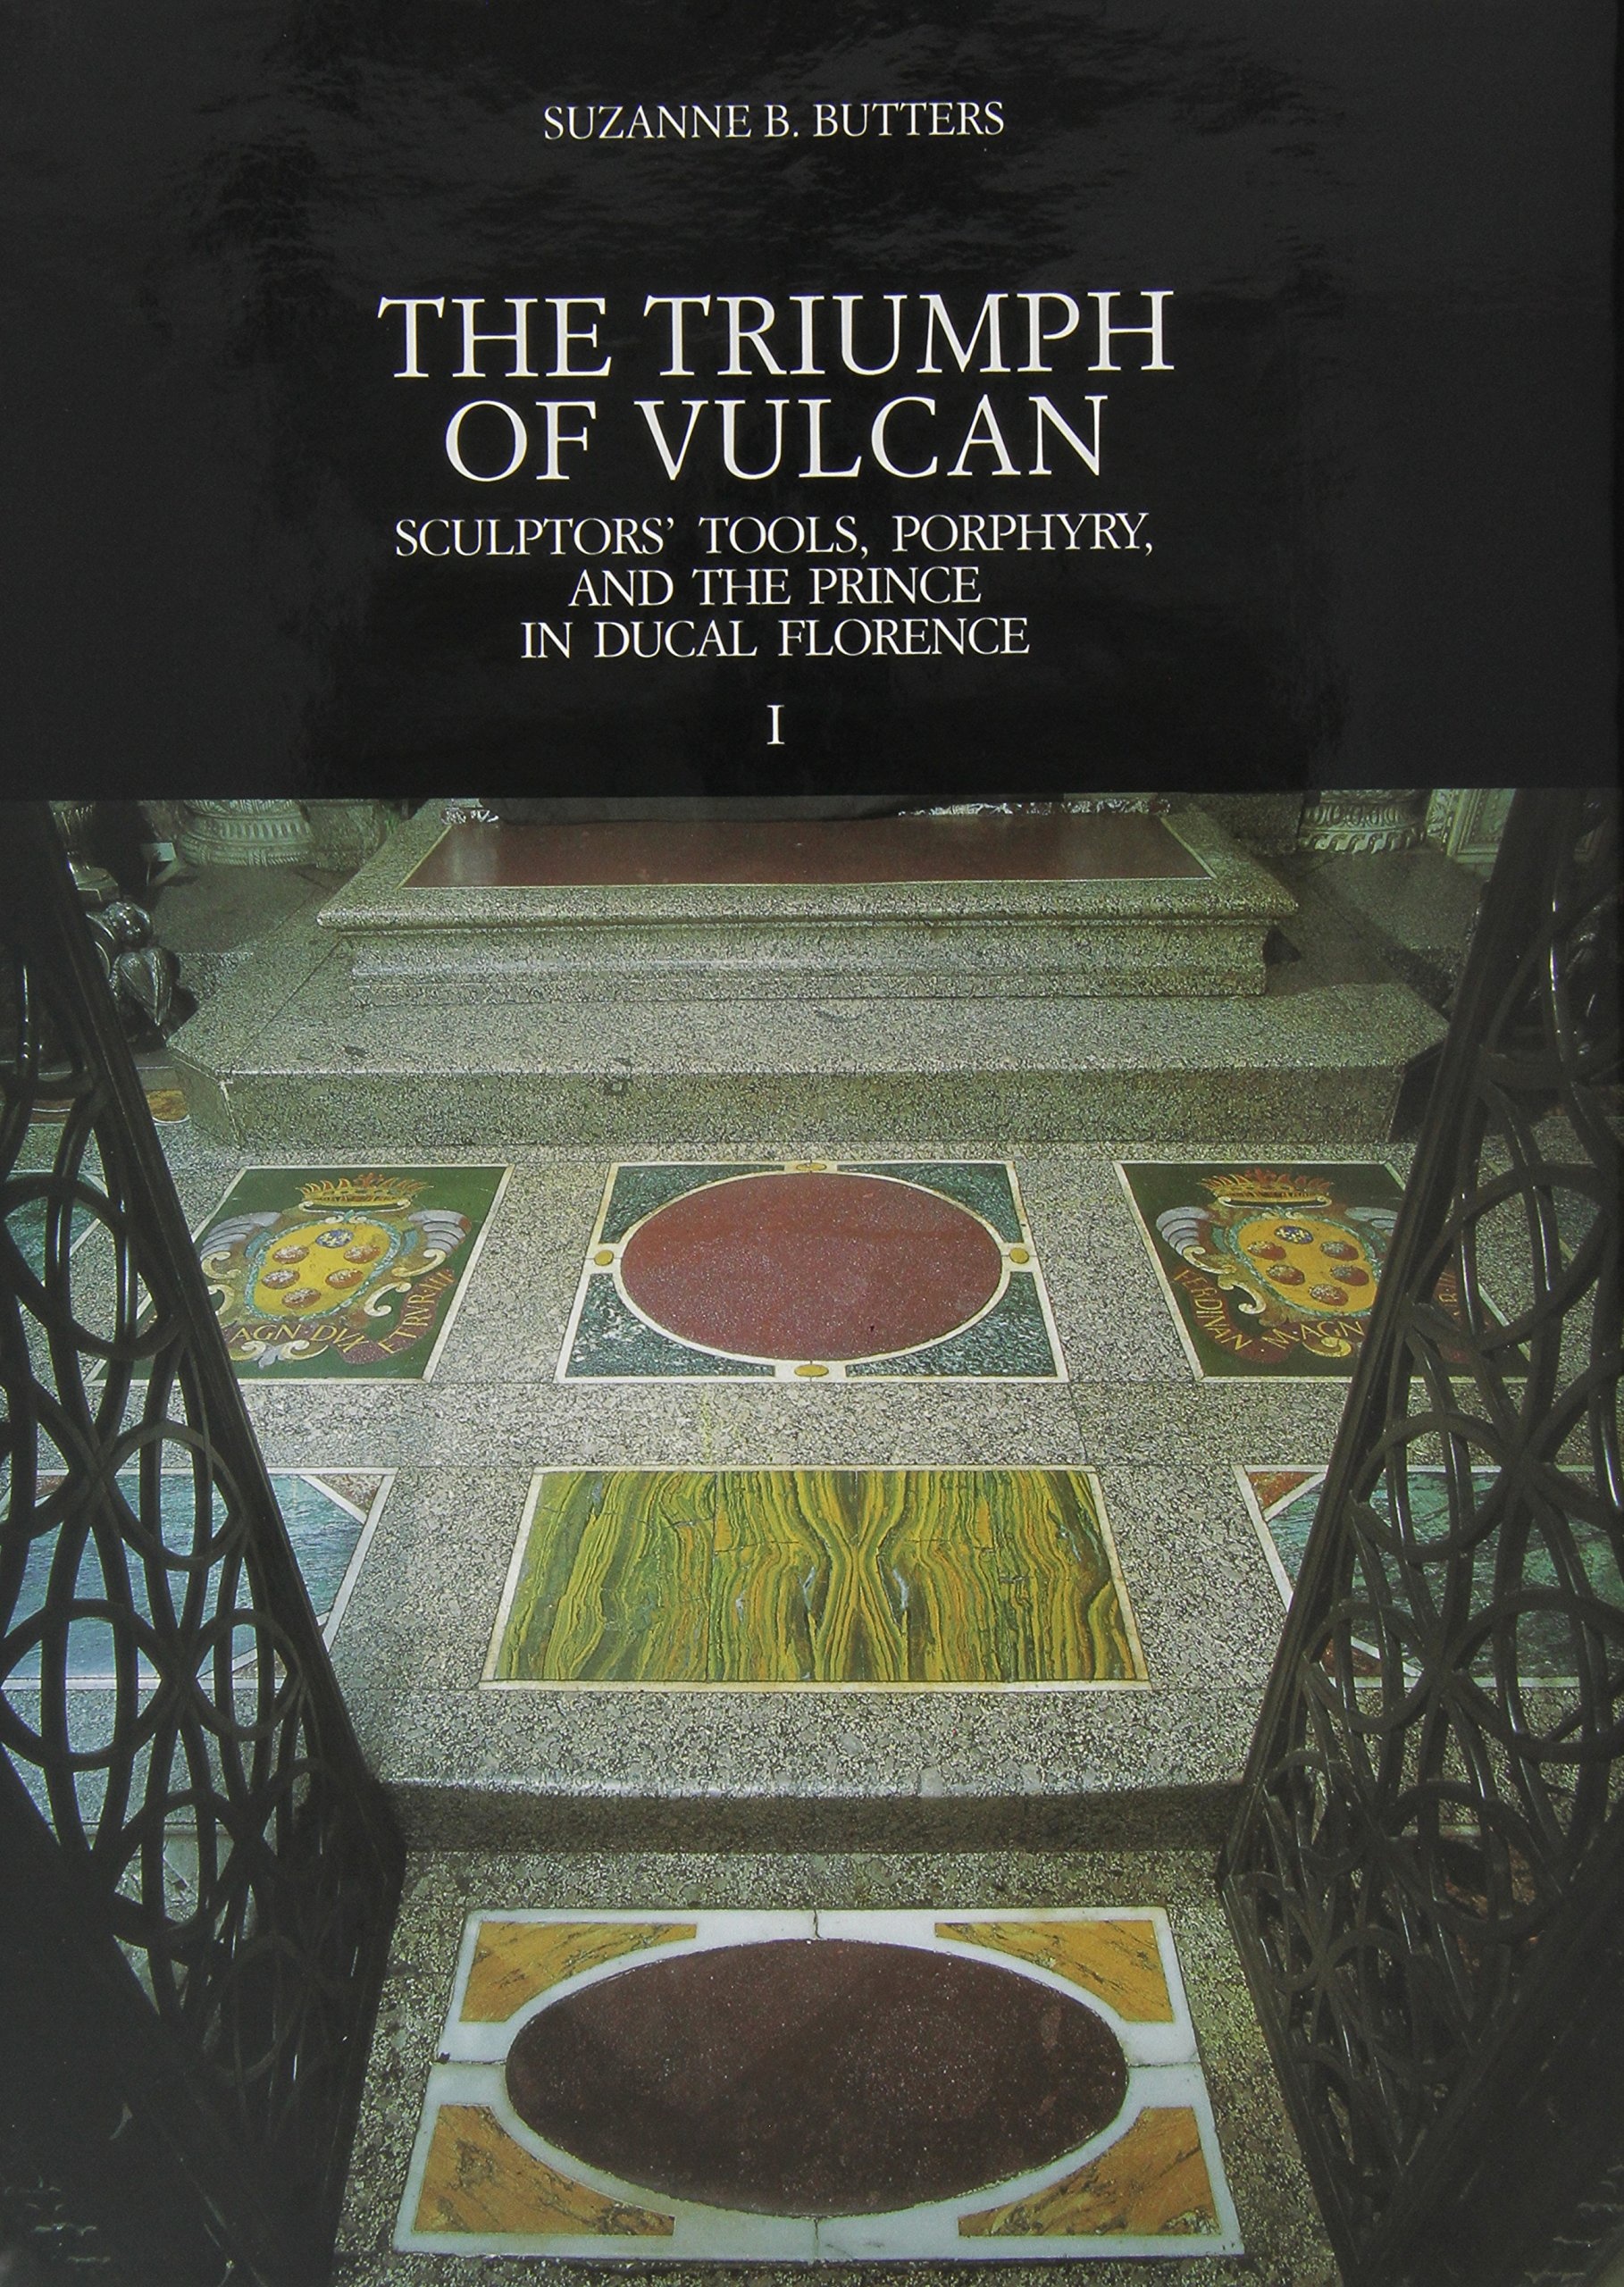 The Triumph of Vulcan: Sculptors’ Tools, Porphyry, and the Prince in Ducal Florence